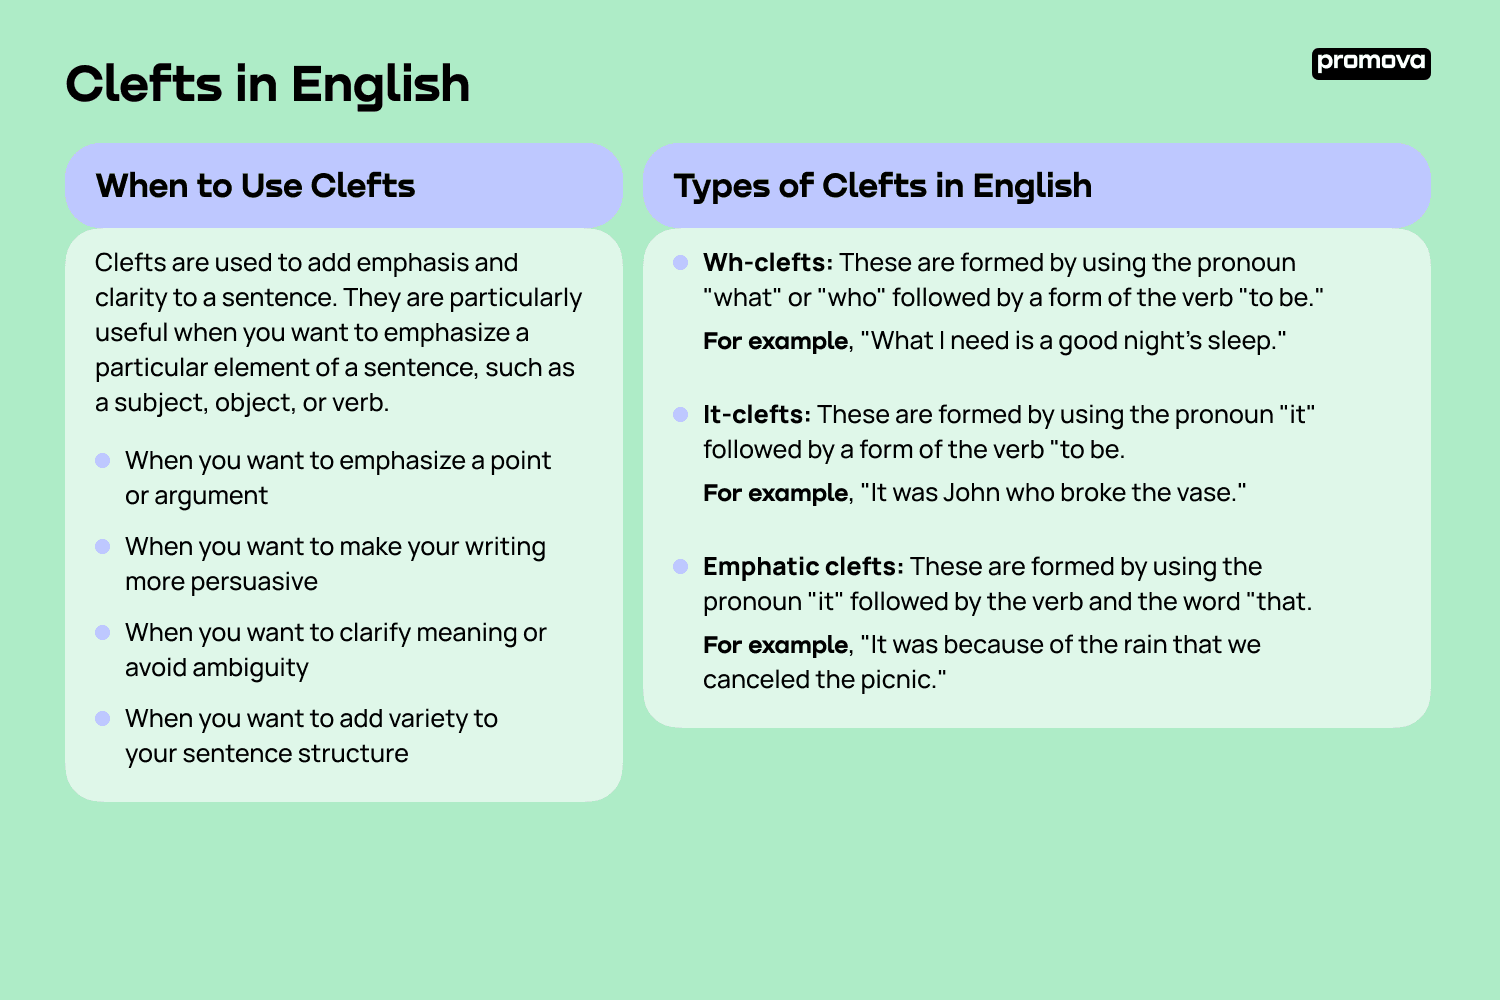 Types of Clefts in English